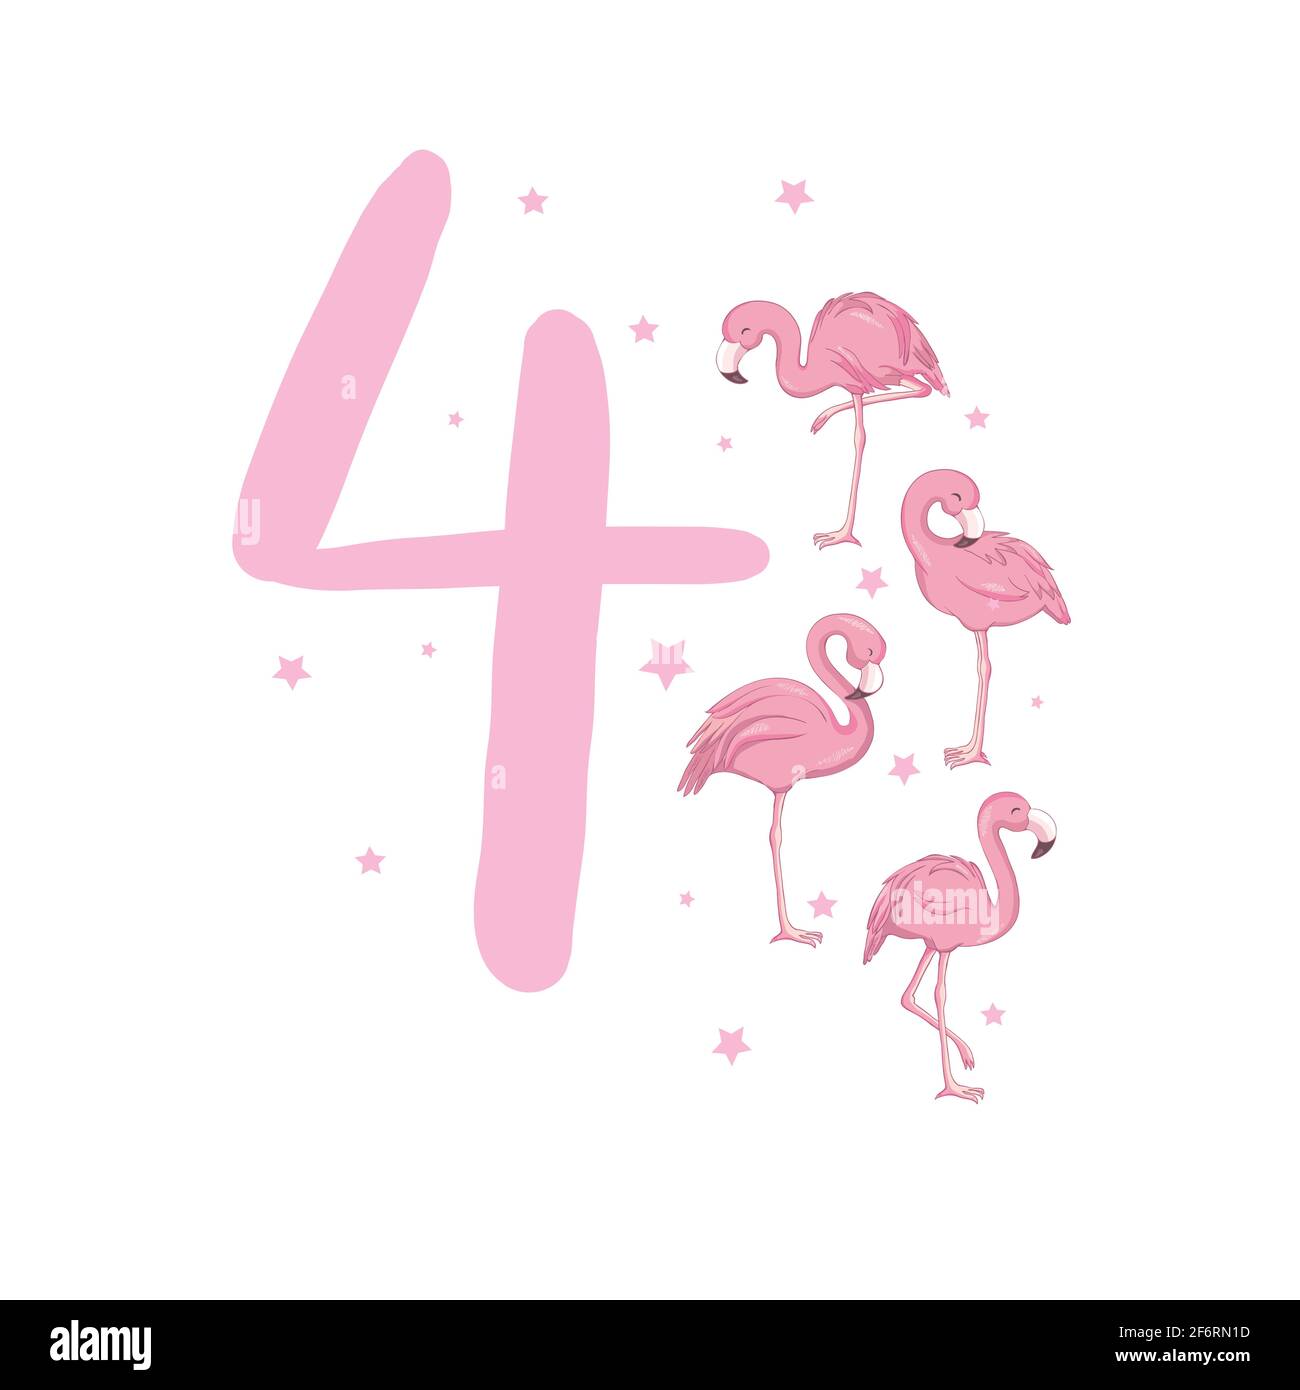 Four Exotic birds. Set of different poses flamingos. Colorful flamingo Stock Vector